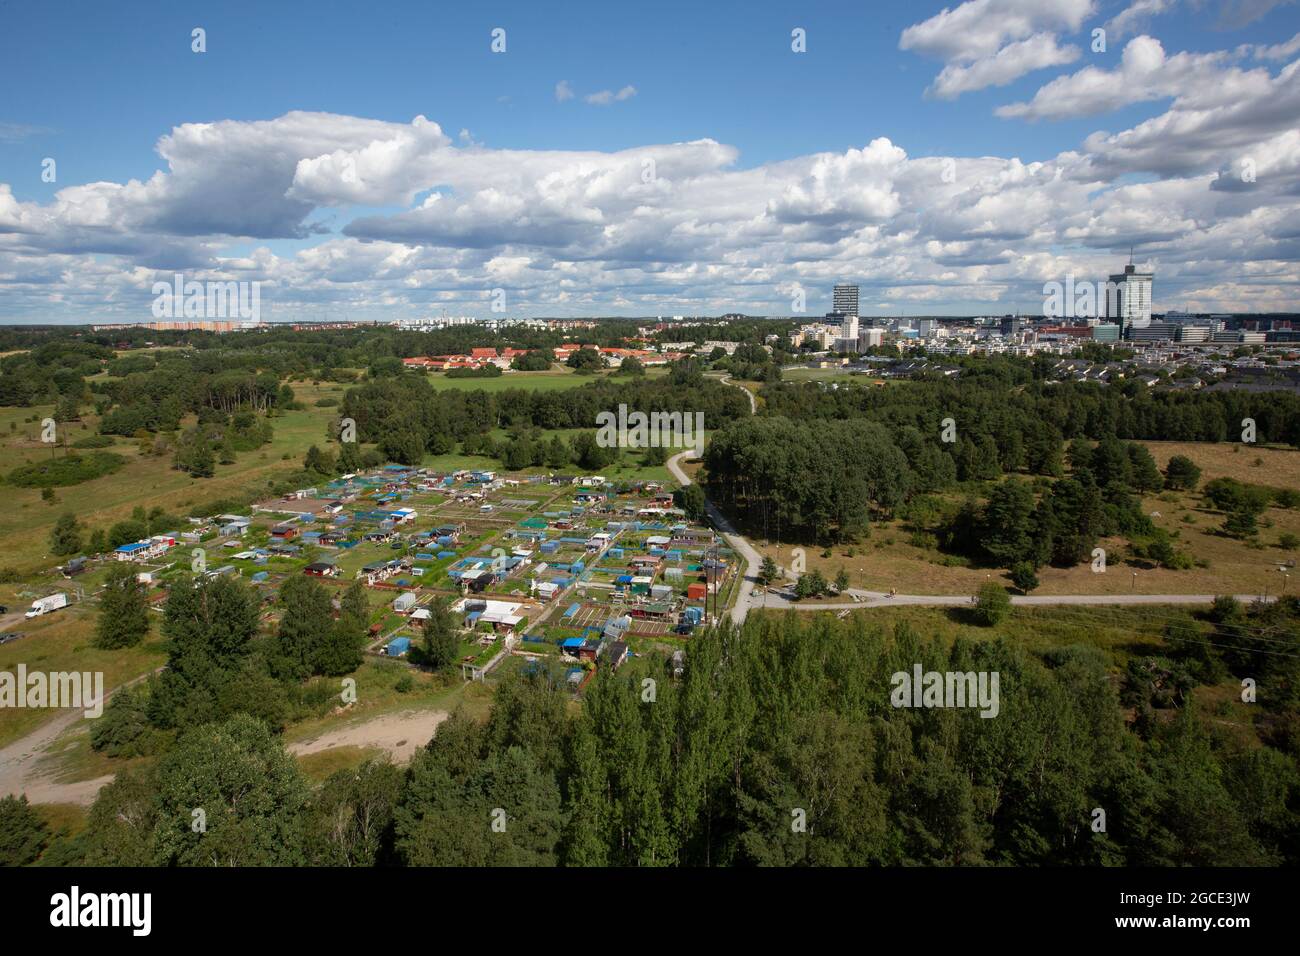 View of Ärvinge Leisure Gardens with Kista in the background. Stock Photo